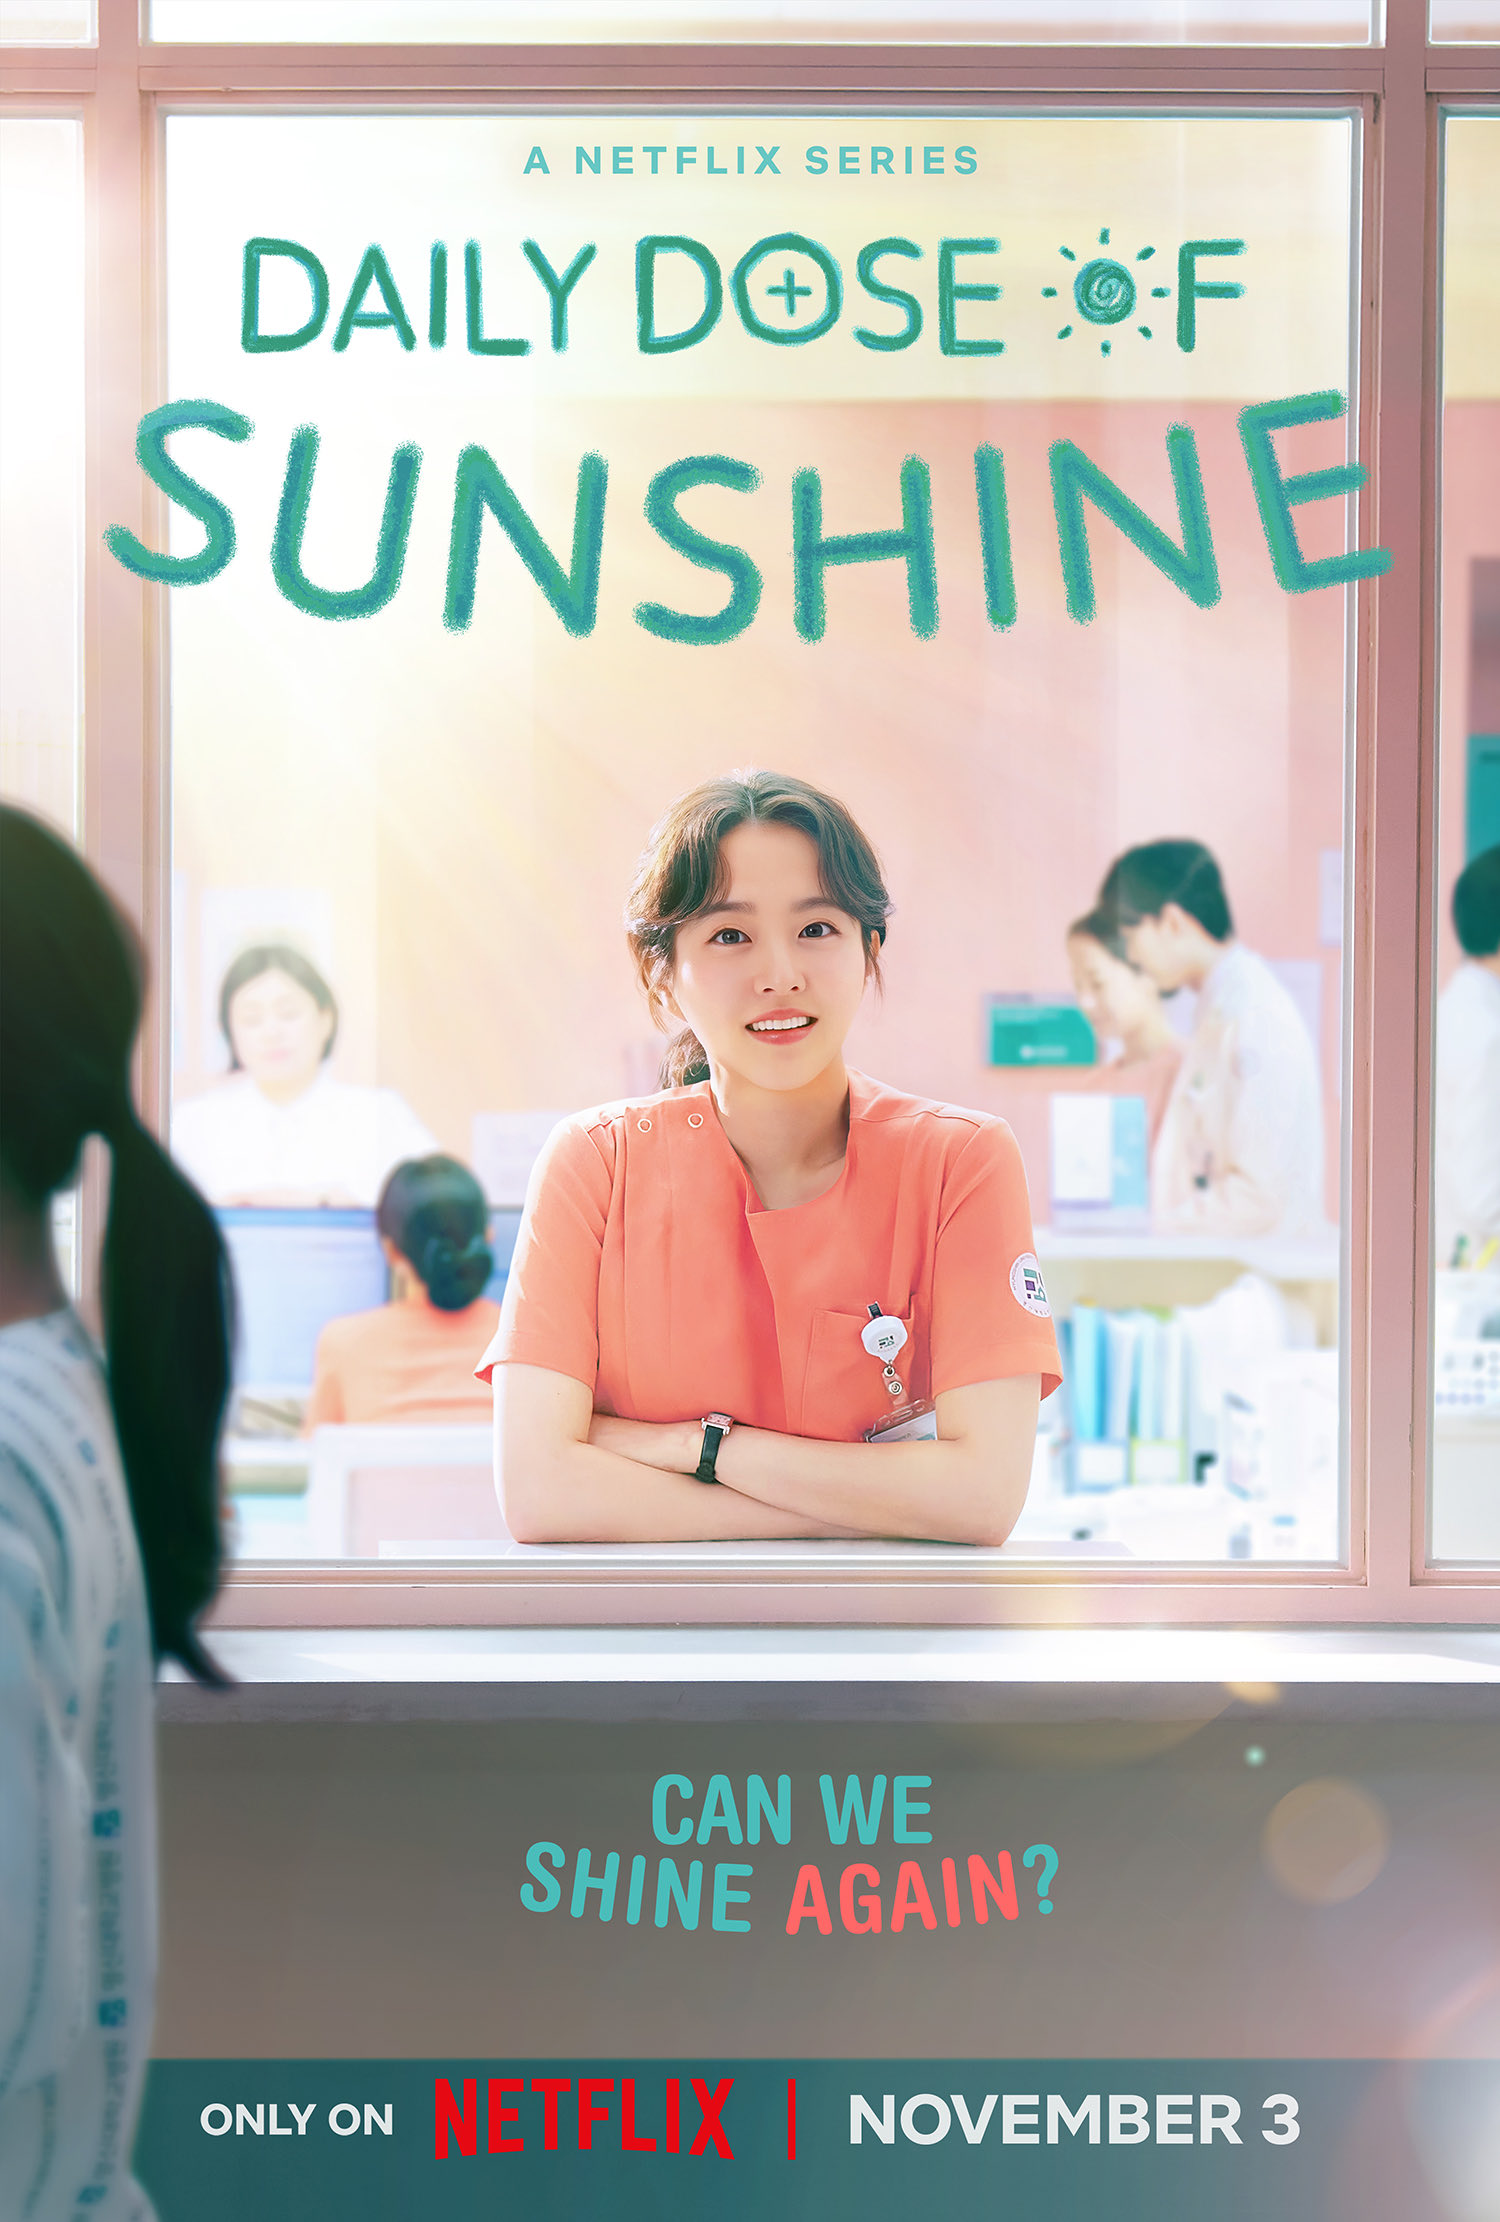 Coming Soon !! Serial Drama Netflix “Daily Dose Of Sunshine”